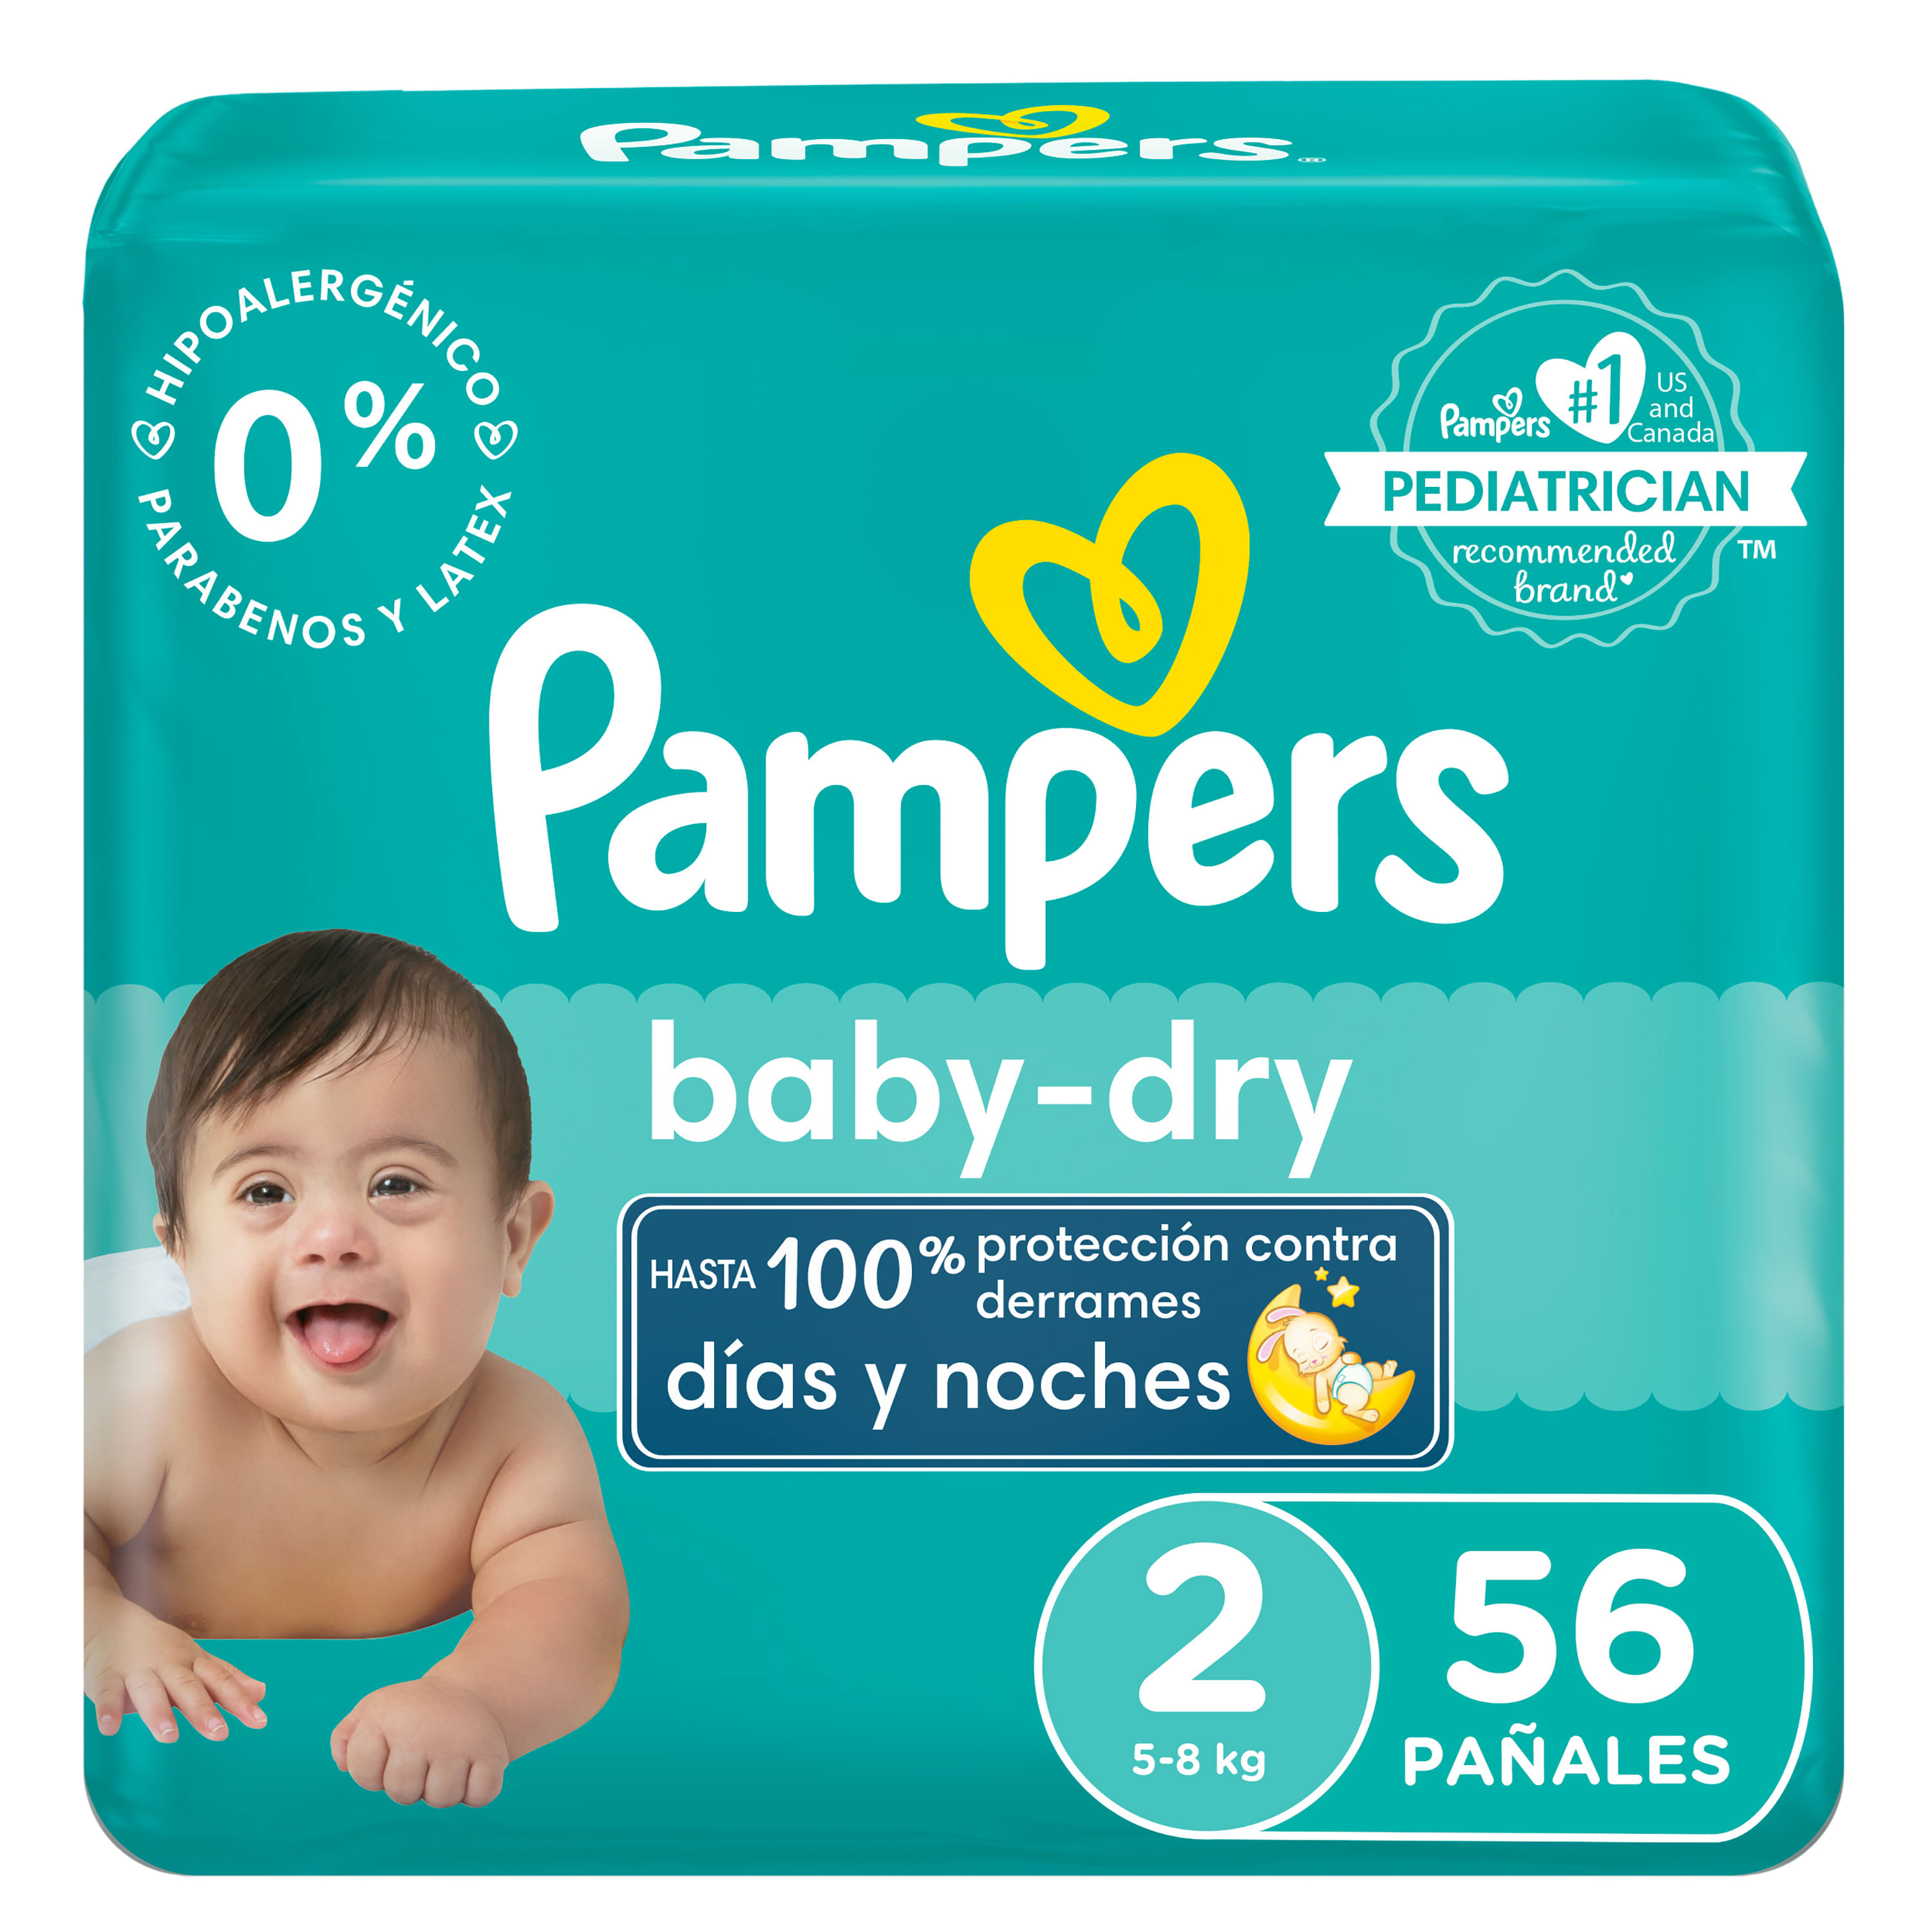 Pampers Pañales Swaddlers, talla 2, 32 unidades